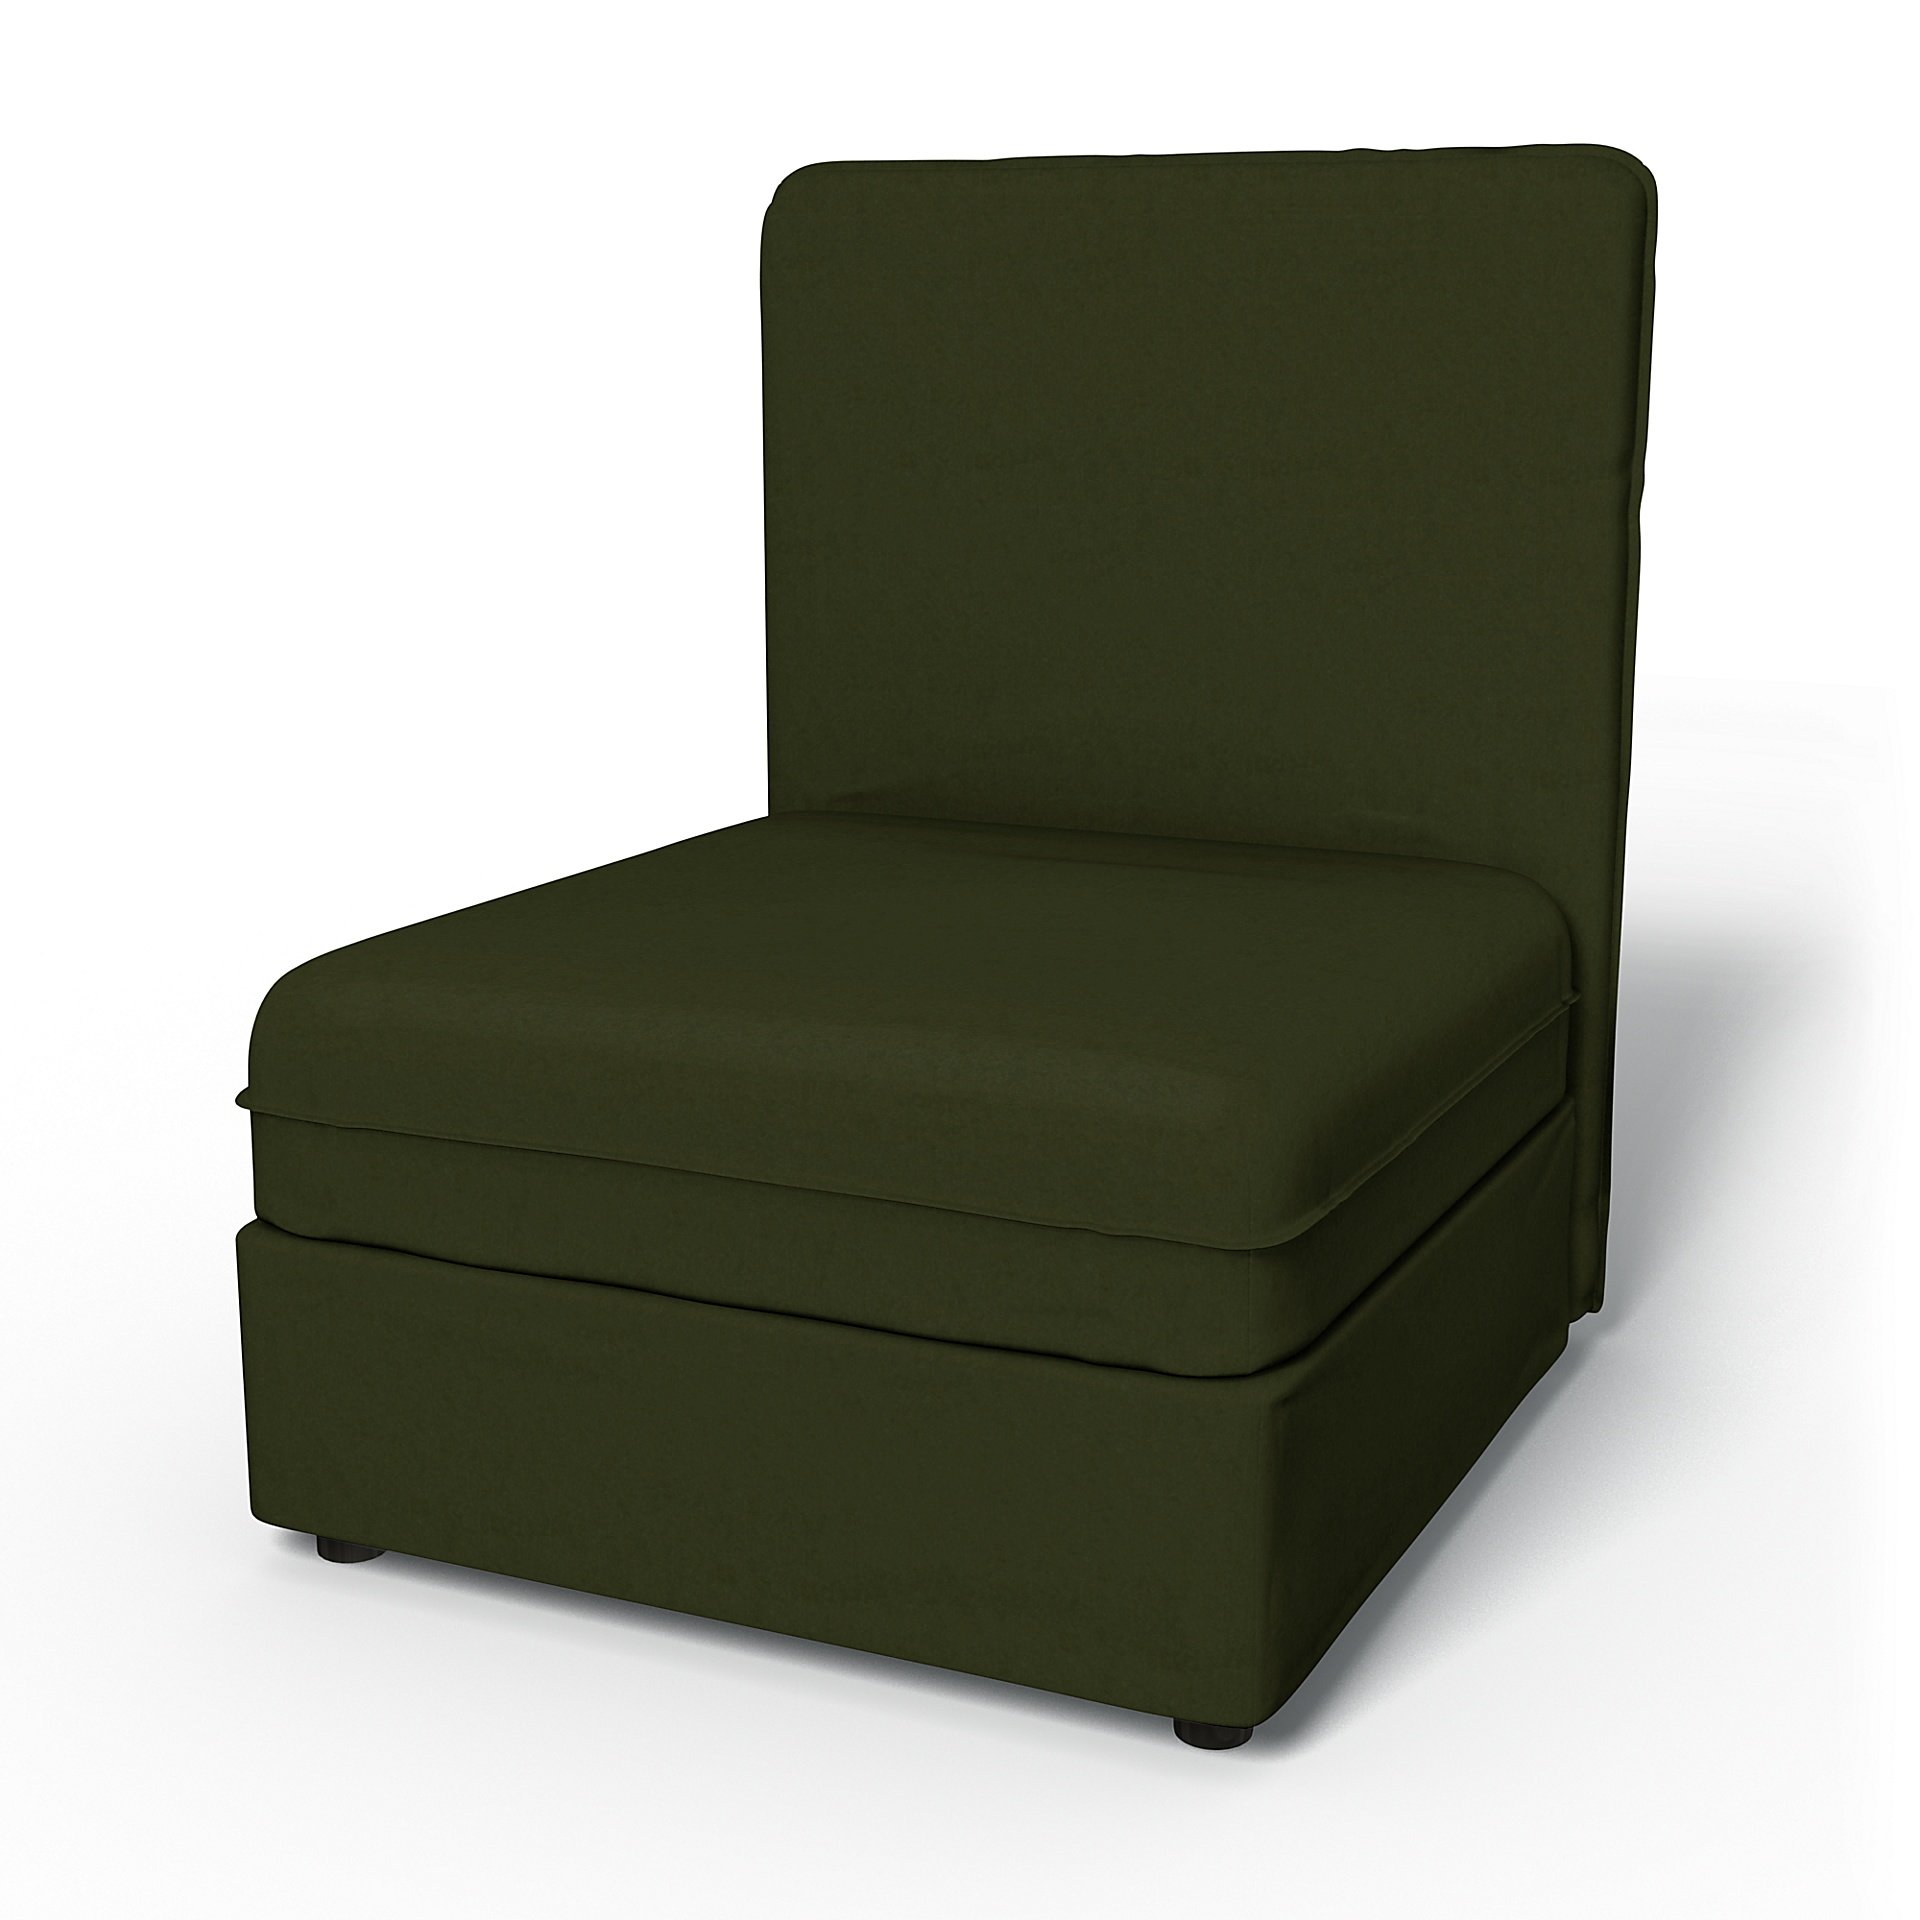 IKEA - Vallentuna Seat Module with High Back and Storage Cover 80x100cm 32x39in, Moss, Velvet - Bemz